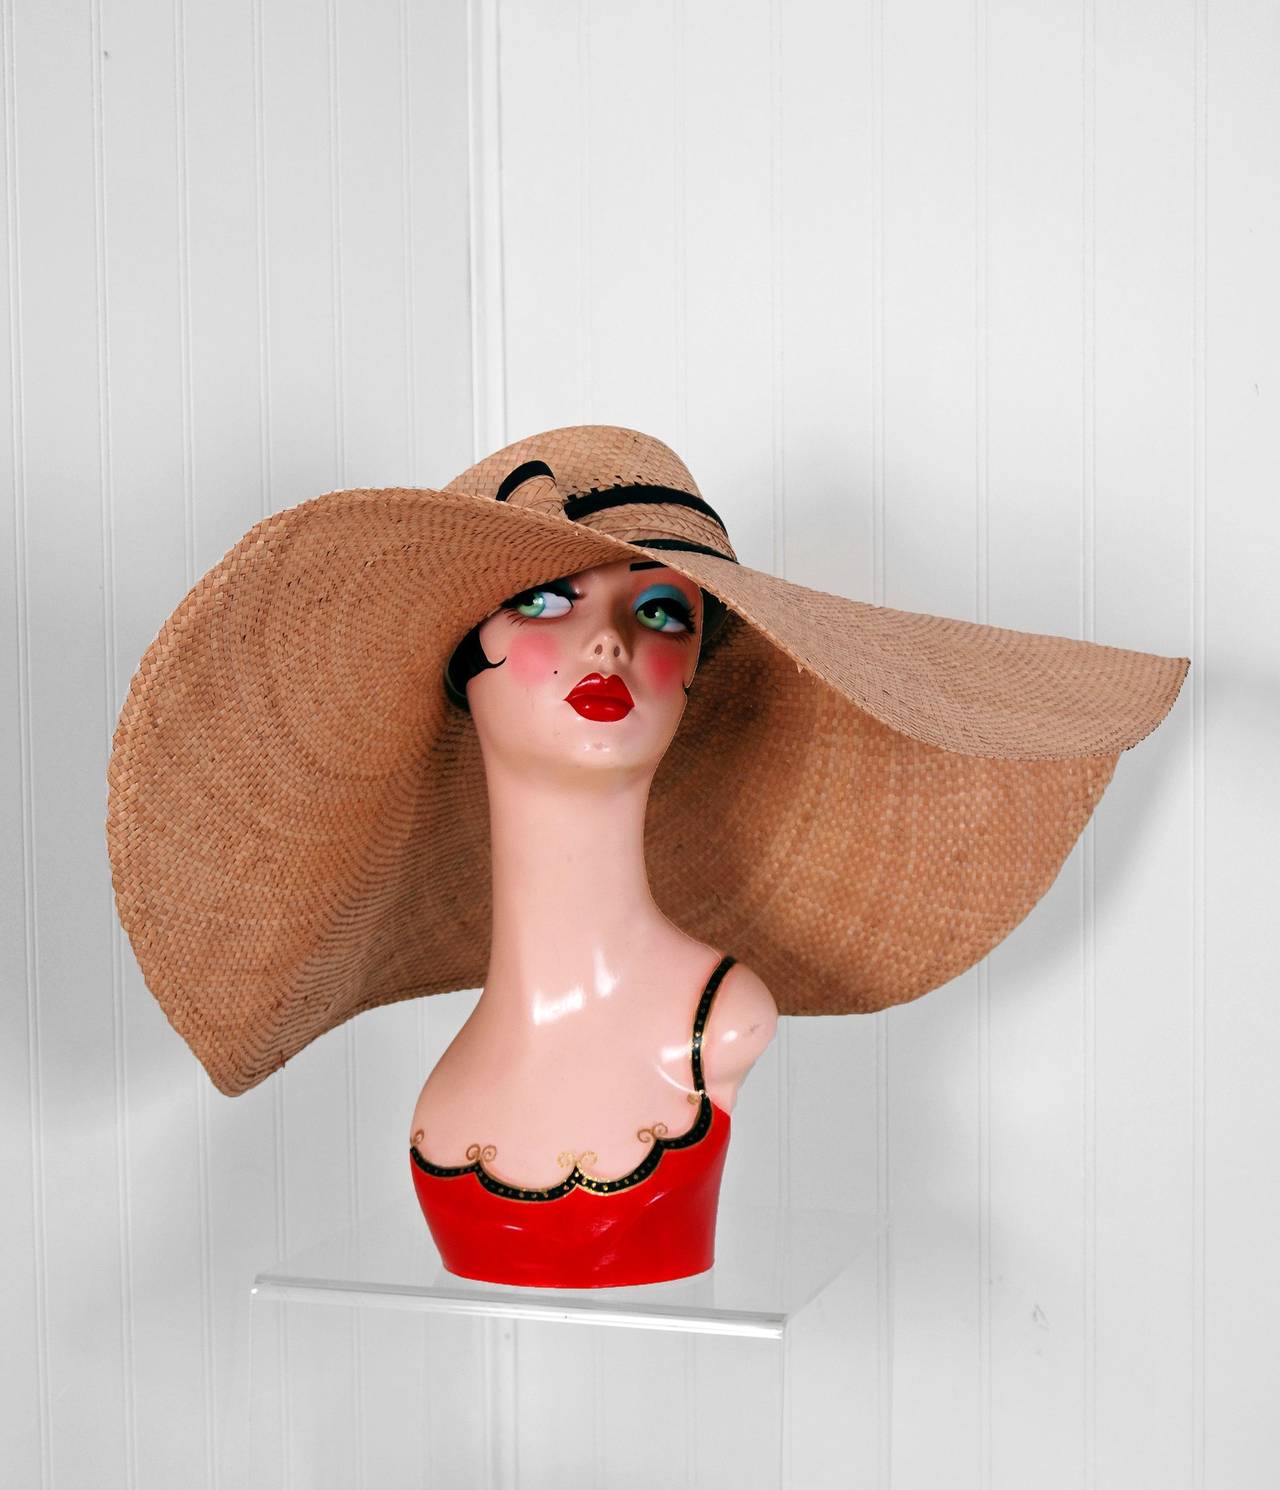 Sensational 1960's woven-straw wide brim hat for the lady who wants all eyes on her! I adore the side-bow which is trimmed with black cotton. An unforgettable fashion statement that is hard to come by! Excellent condition.
Measurements;
Interior